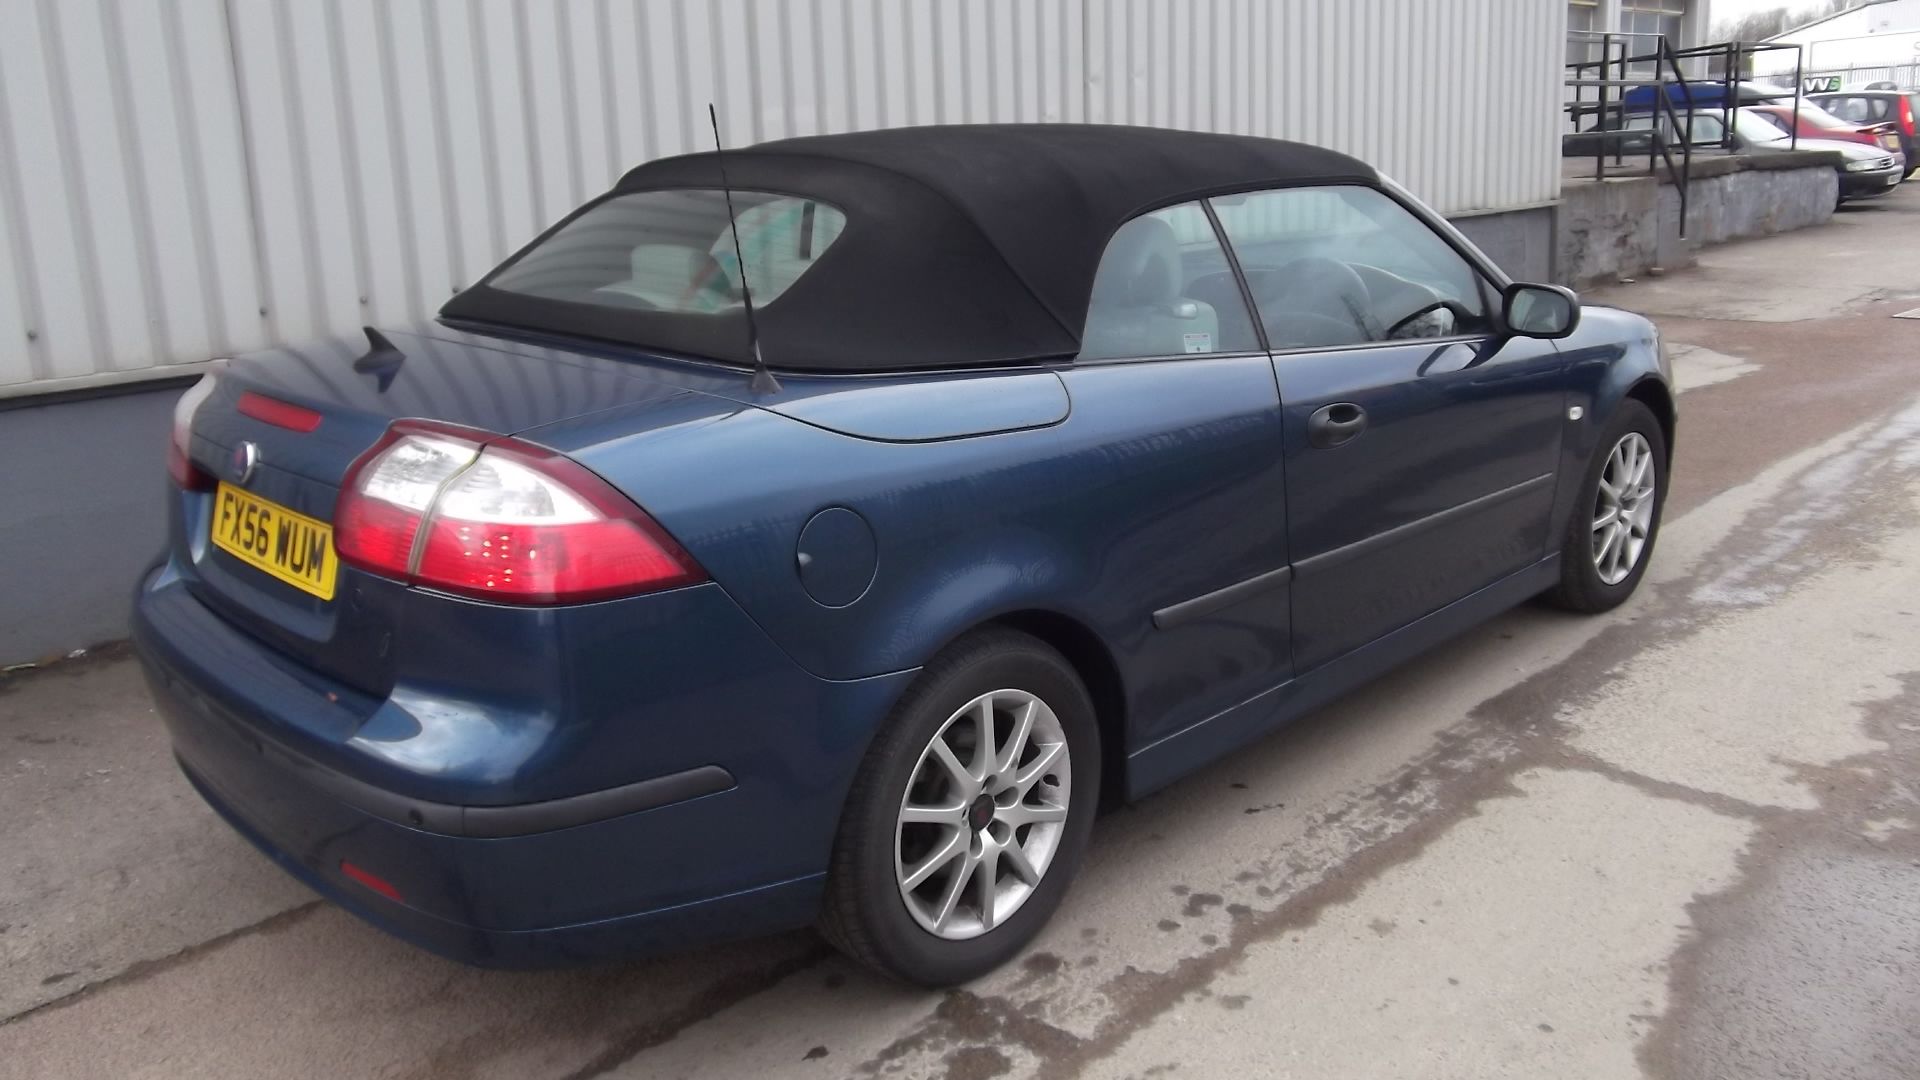 2006 Saab 9-3 Linear 150 Bhp 2.0 3Dr Convertible - FSH - CL505 - NO VAT ON THE HAMM - Image 13 of 19